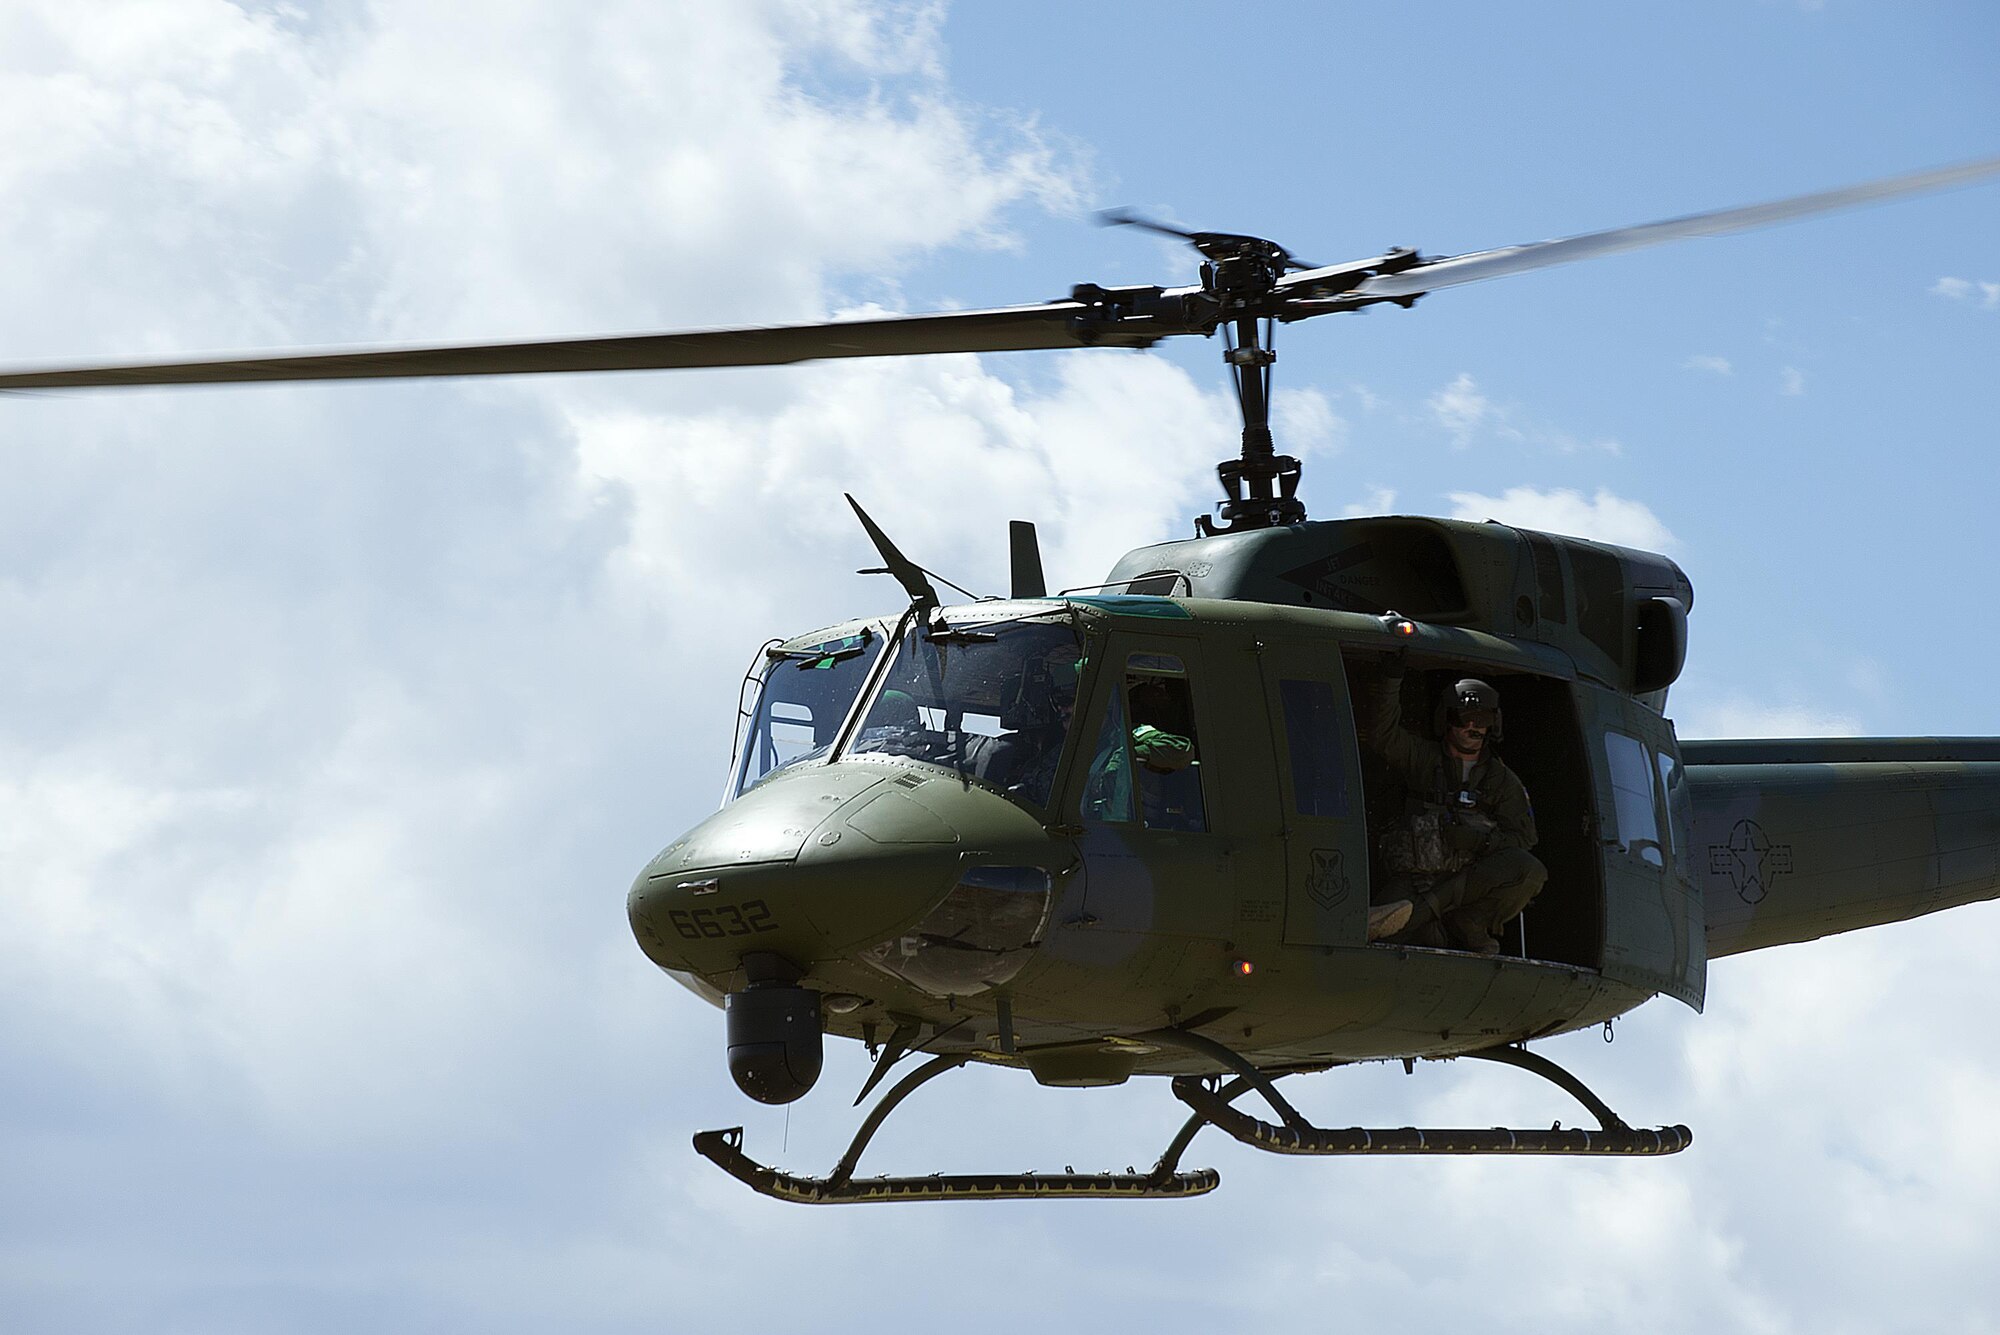 A UH-1N Huey from the 582nd Helicopter Group ascends during a training exercise Aug. 10, 2015. The helicopter crews from the 582nd HG provide air support and transport for security forces members in the missile complex. (U.S. Air Force file photo by Senior Airman Brandon Valle)